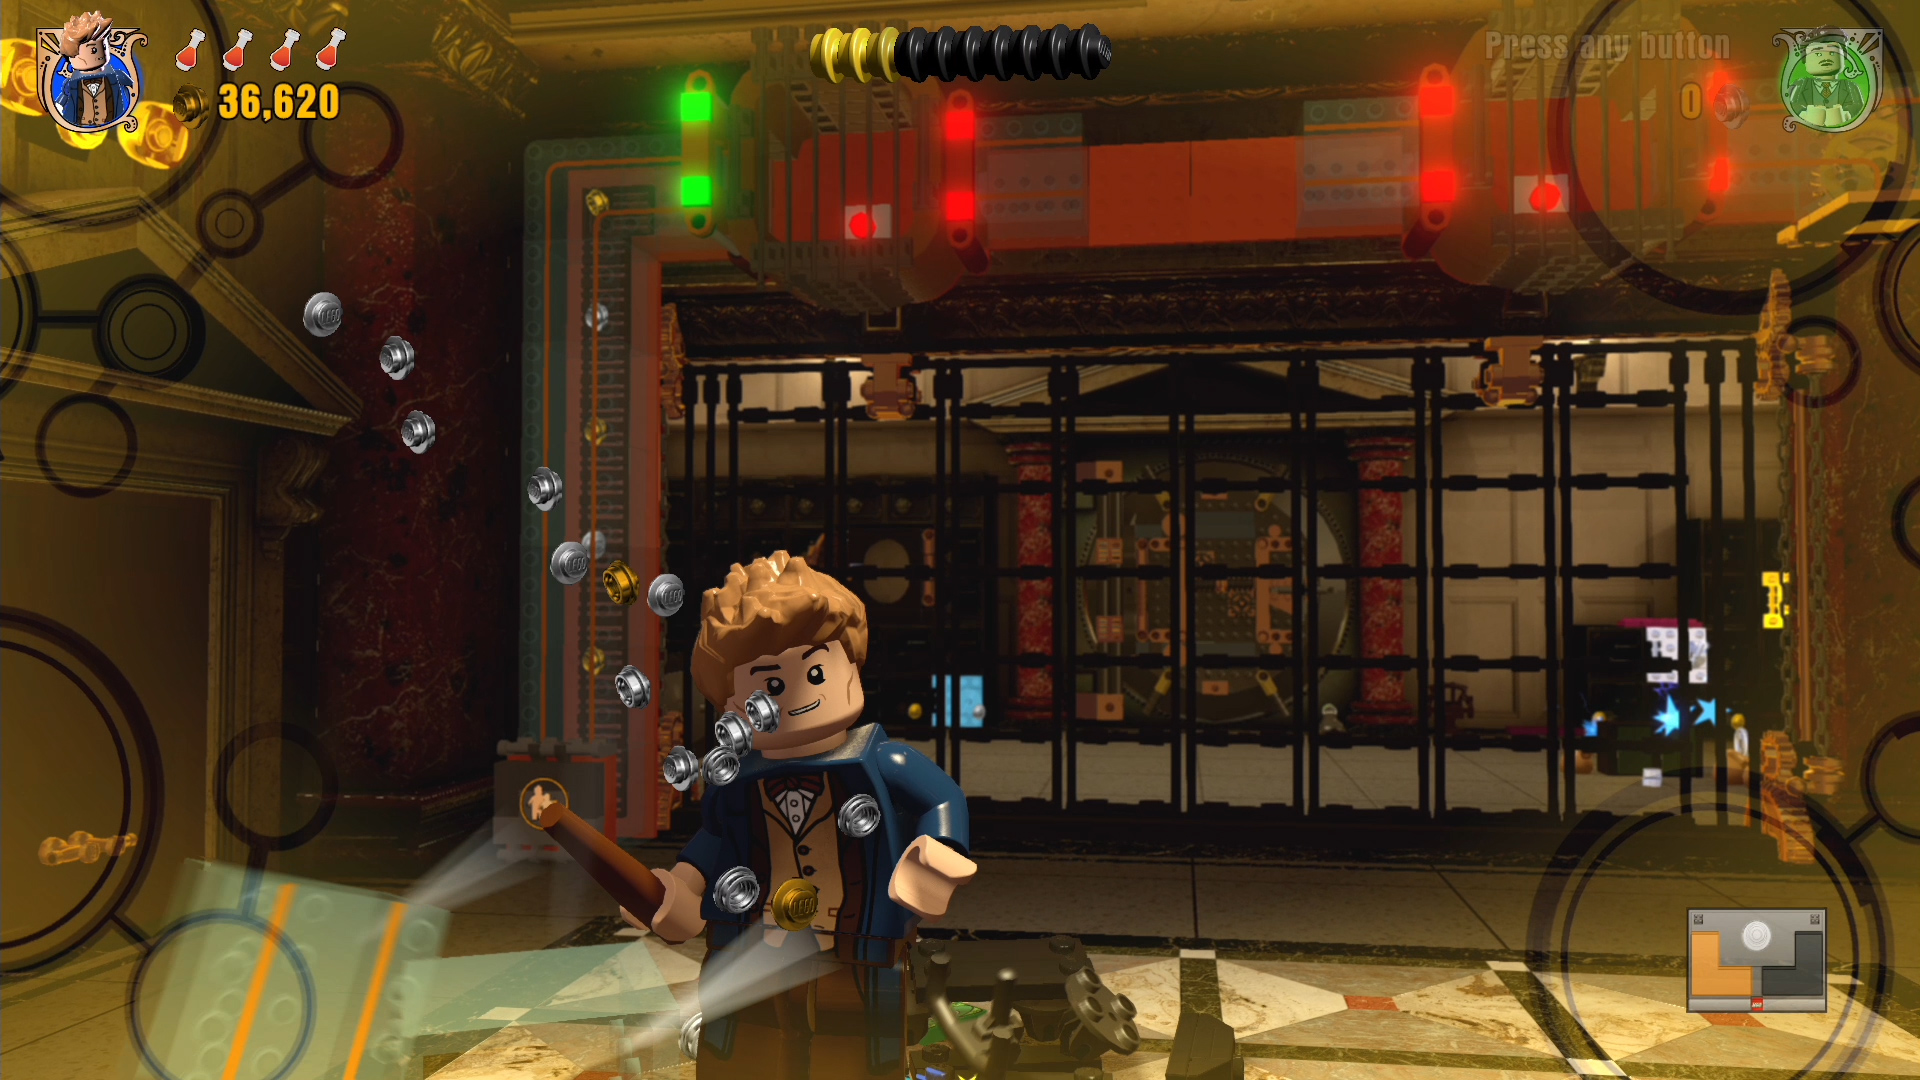 All I Know About Fantastic Beasts I Learned From LEGO Dimensions